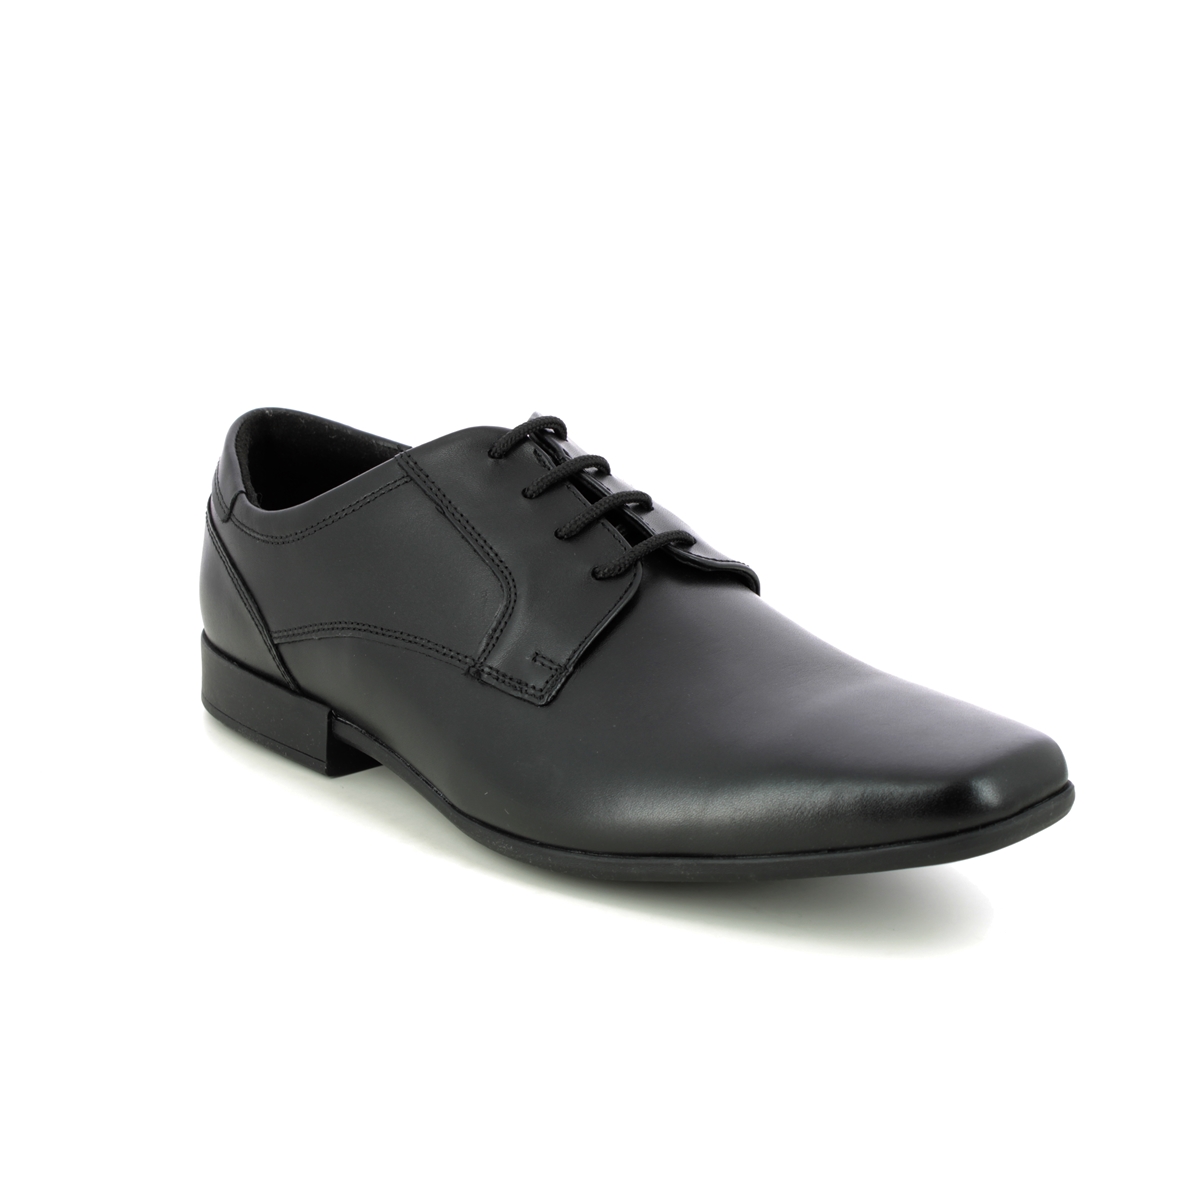 Clarks Sidton Lace Black leather shoes